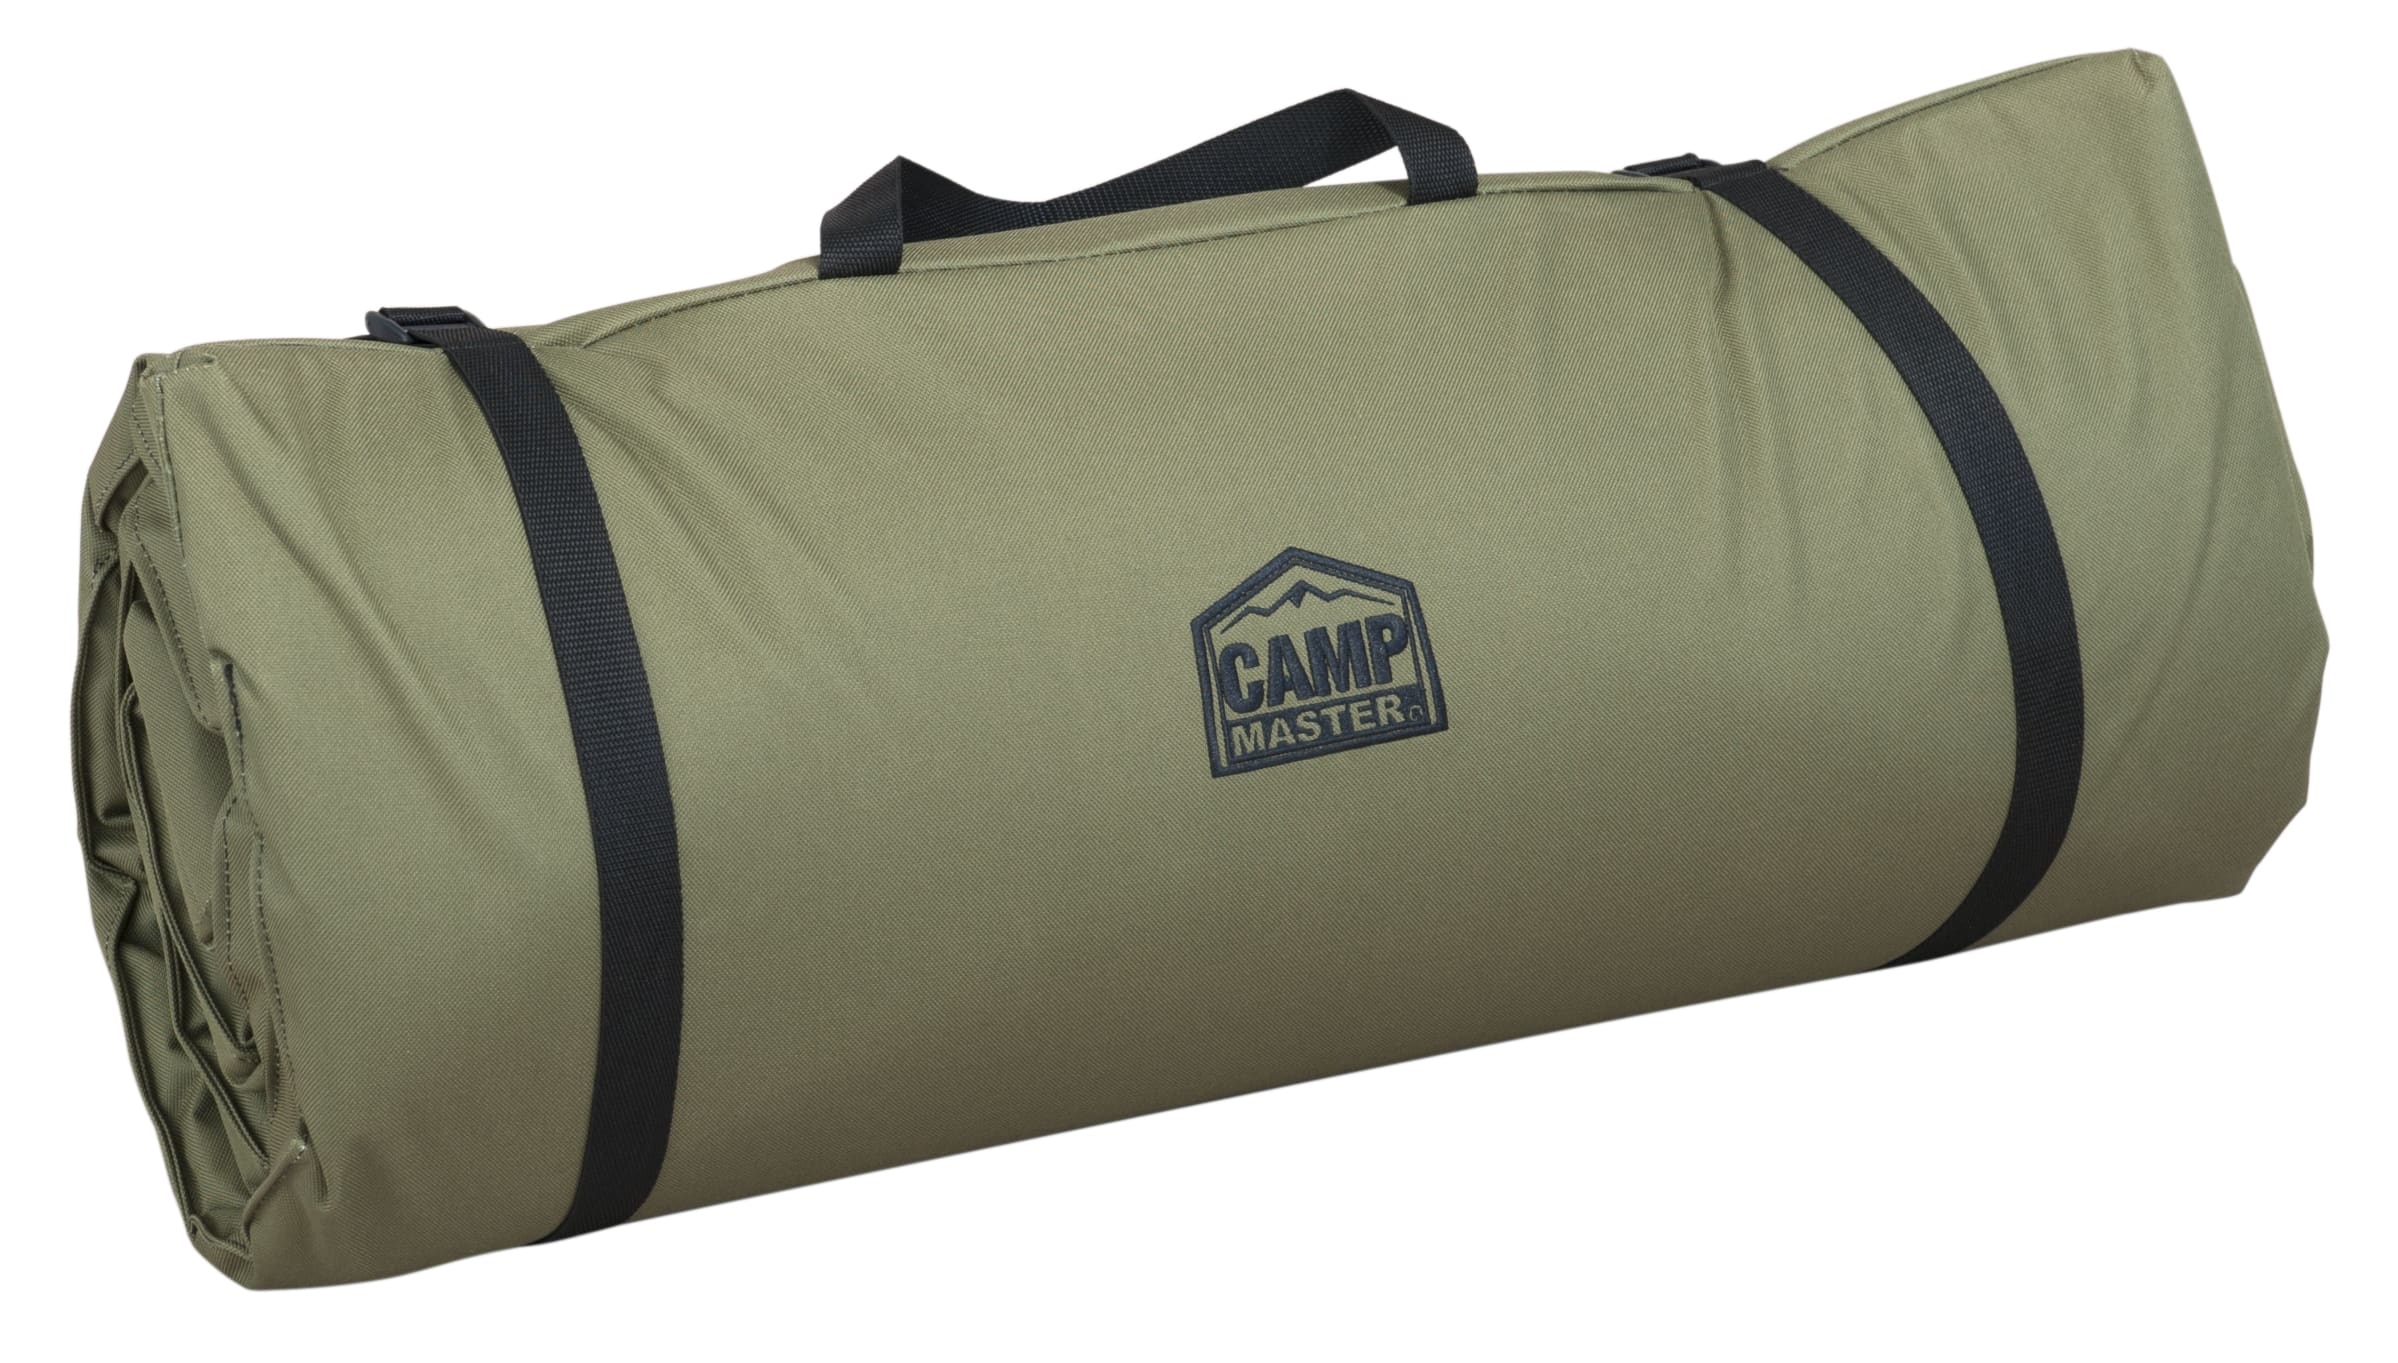 Campmaster 25 Mm Roll-up Mattress for sale with Makro Outlet and bidorbuy